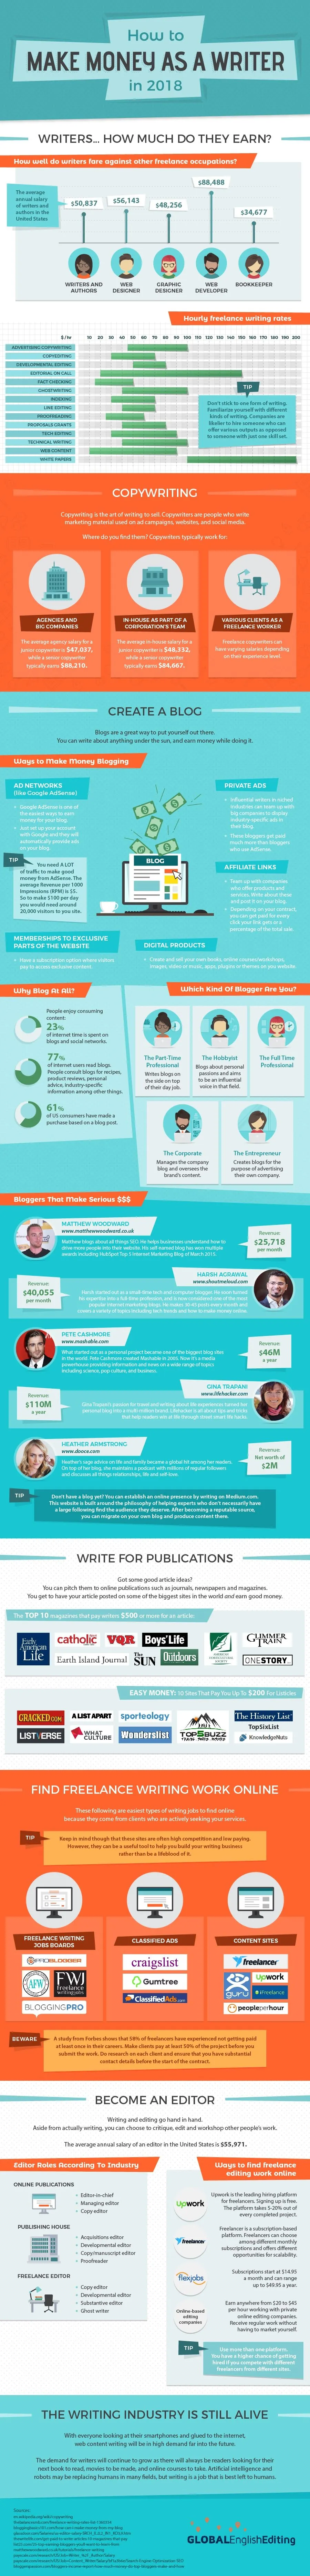 How to Make Money as a Writer (Infographic)